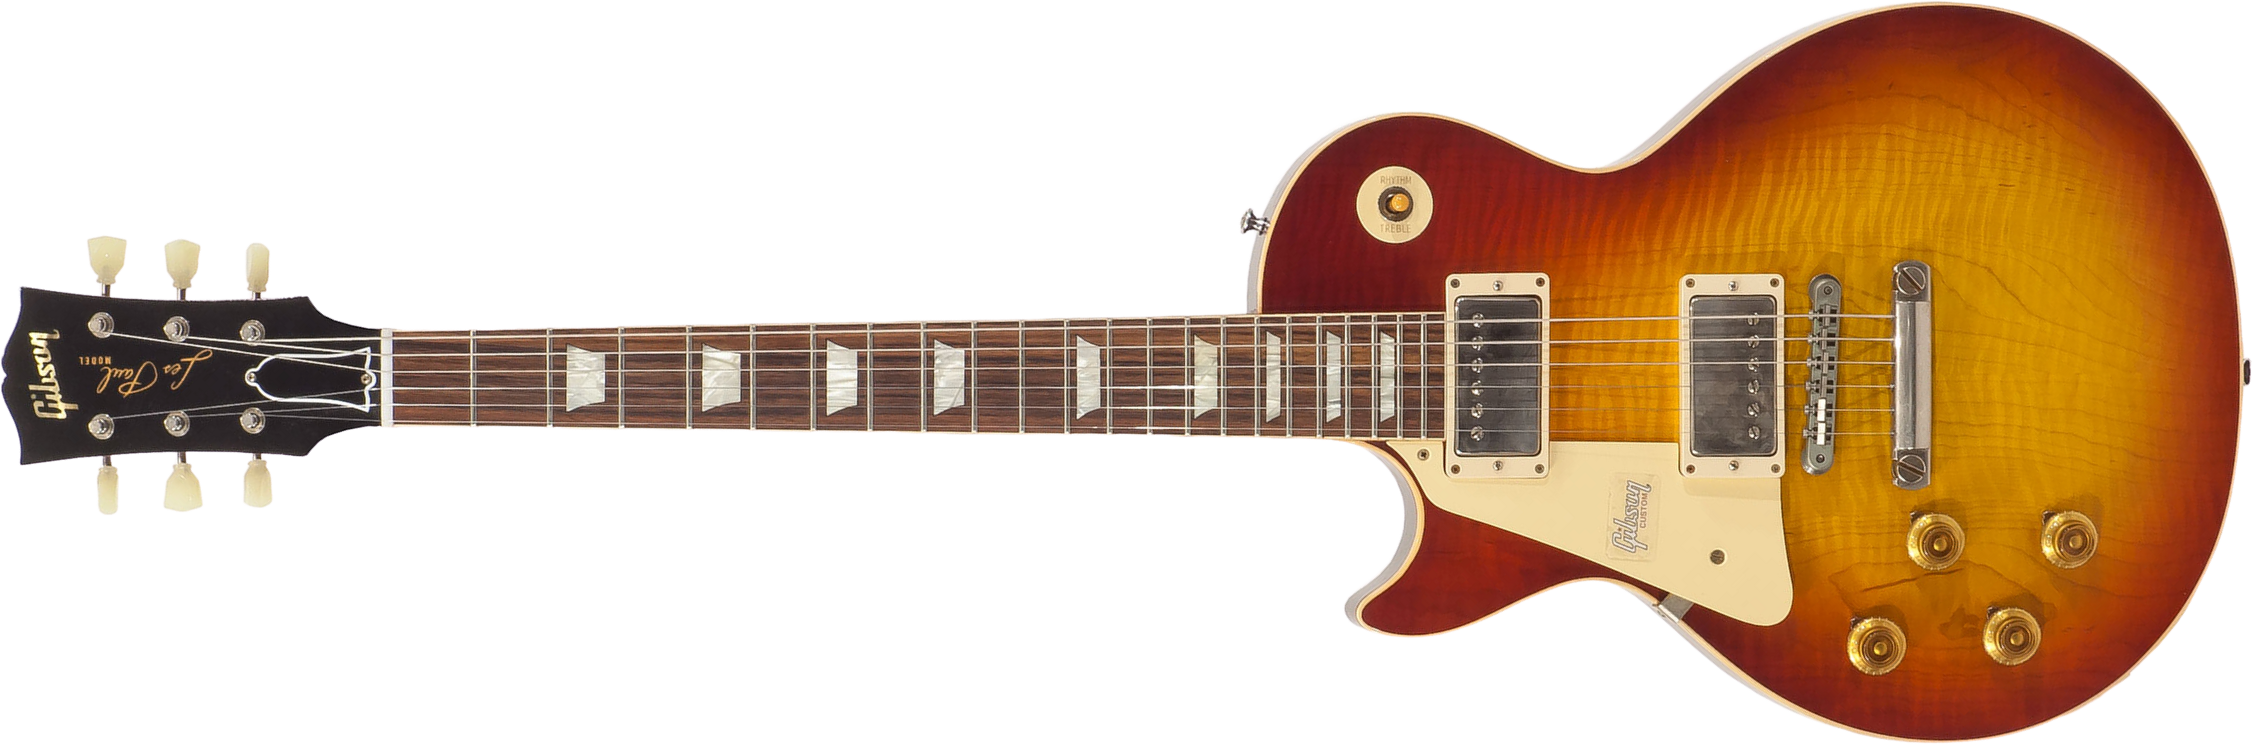 Gibson Custom Shop M2m Les Paul Standard 1959 Lh Gaucher Ltd 2h Ht Rw #971610 - Vos Washed Cherry - Left-handed electric guitar - Main picture